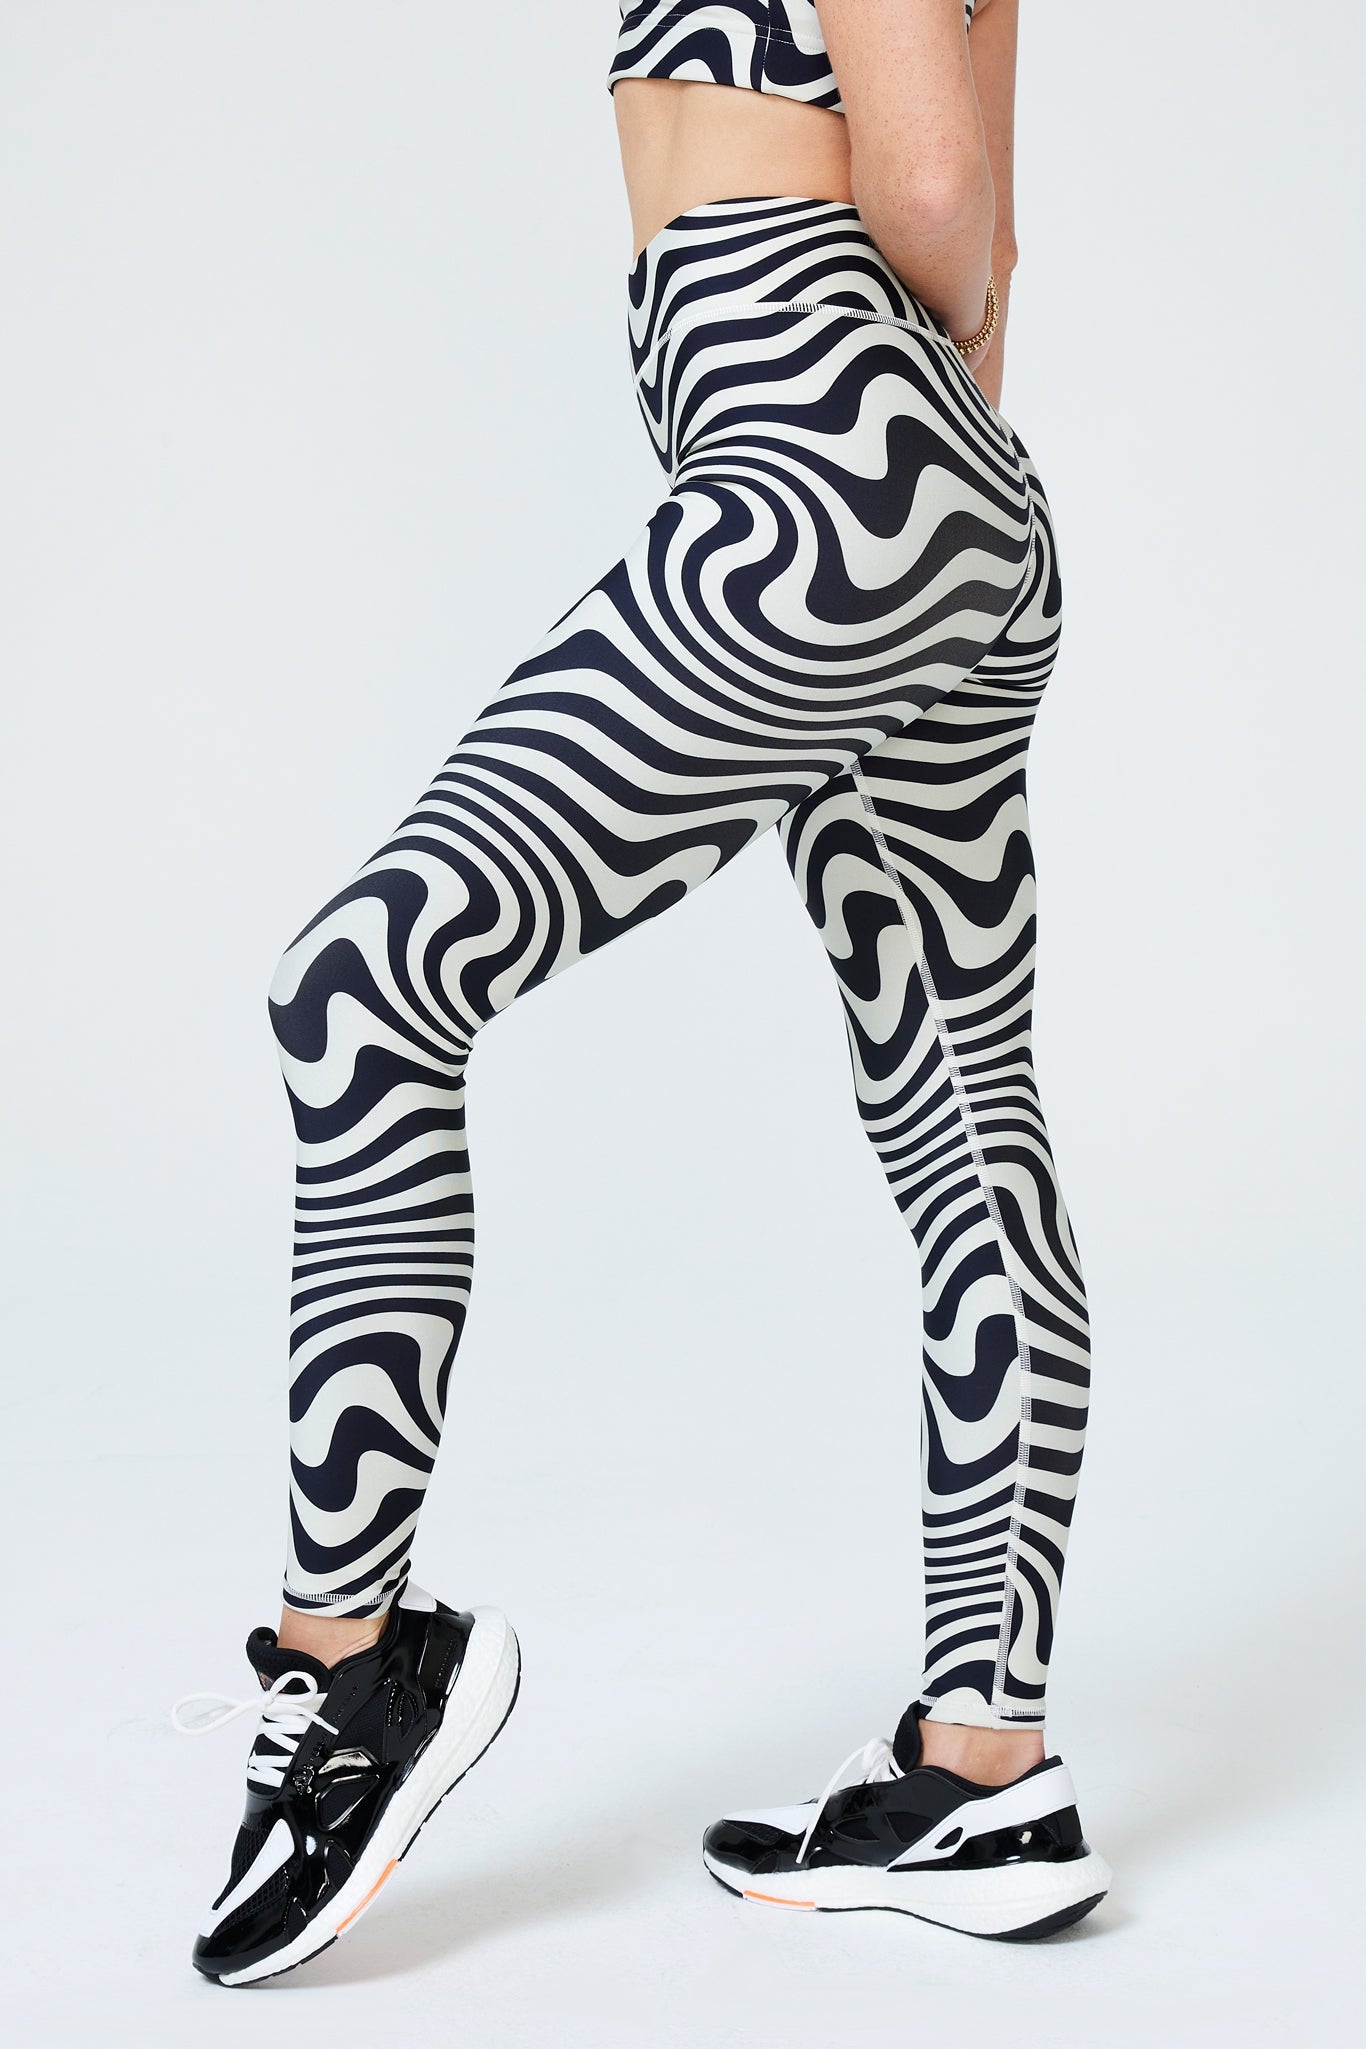 DuoKnit Leggings in Black and White Wave